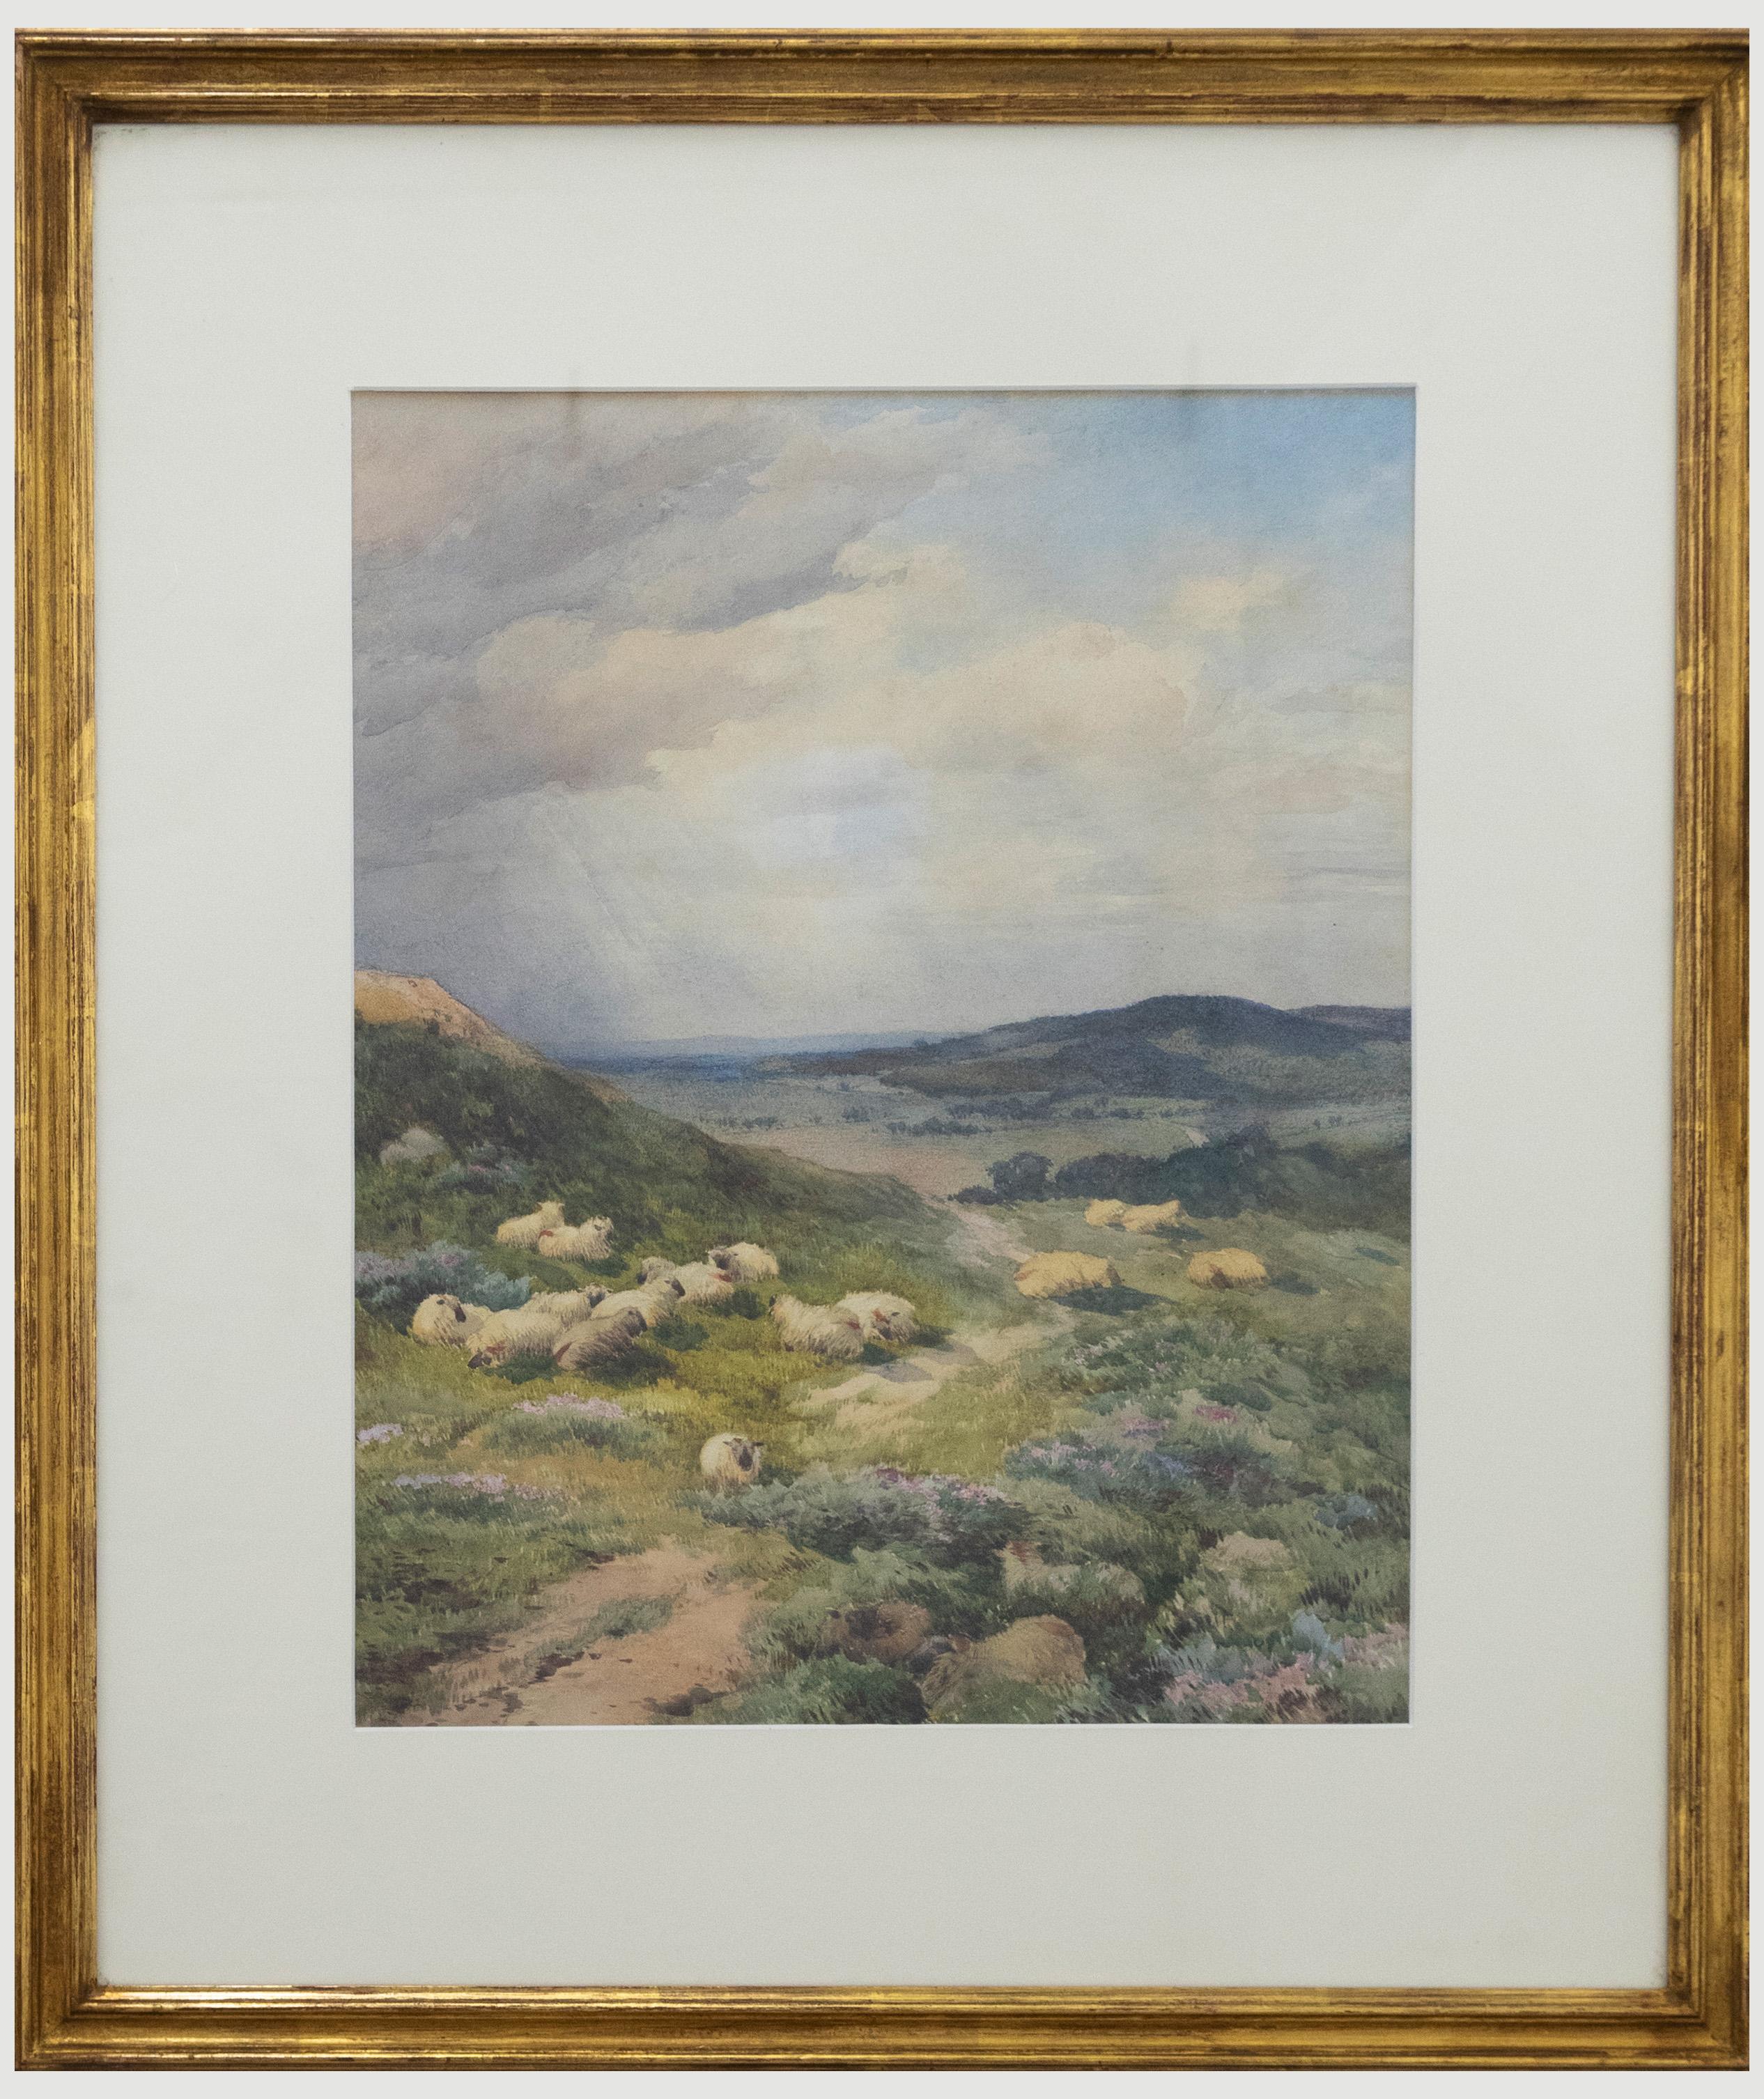 Unknown Landscape Art - Framed Late 19th Century Watercolour - Sheep on the Hillside